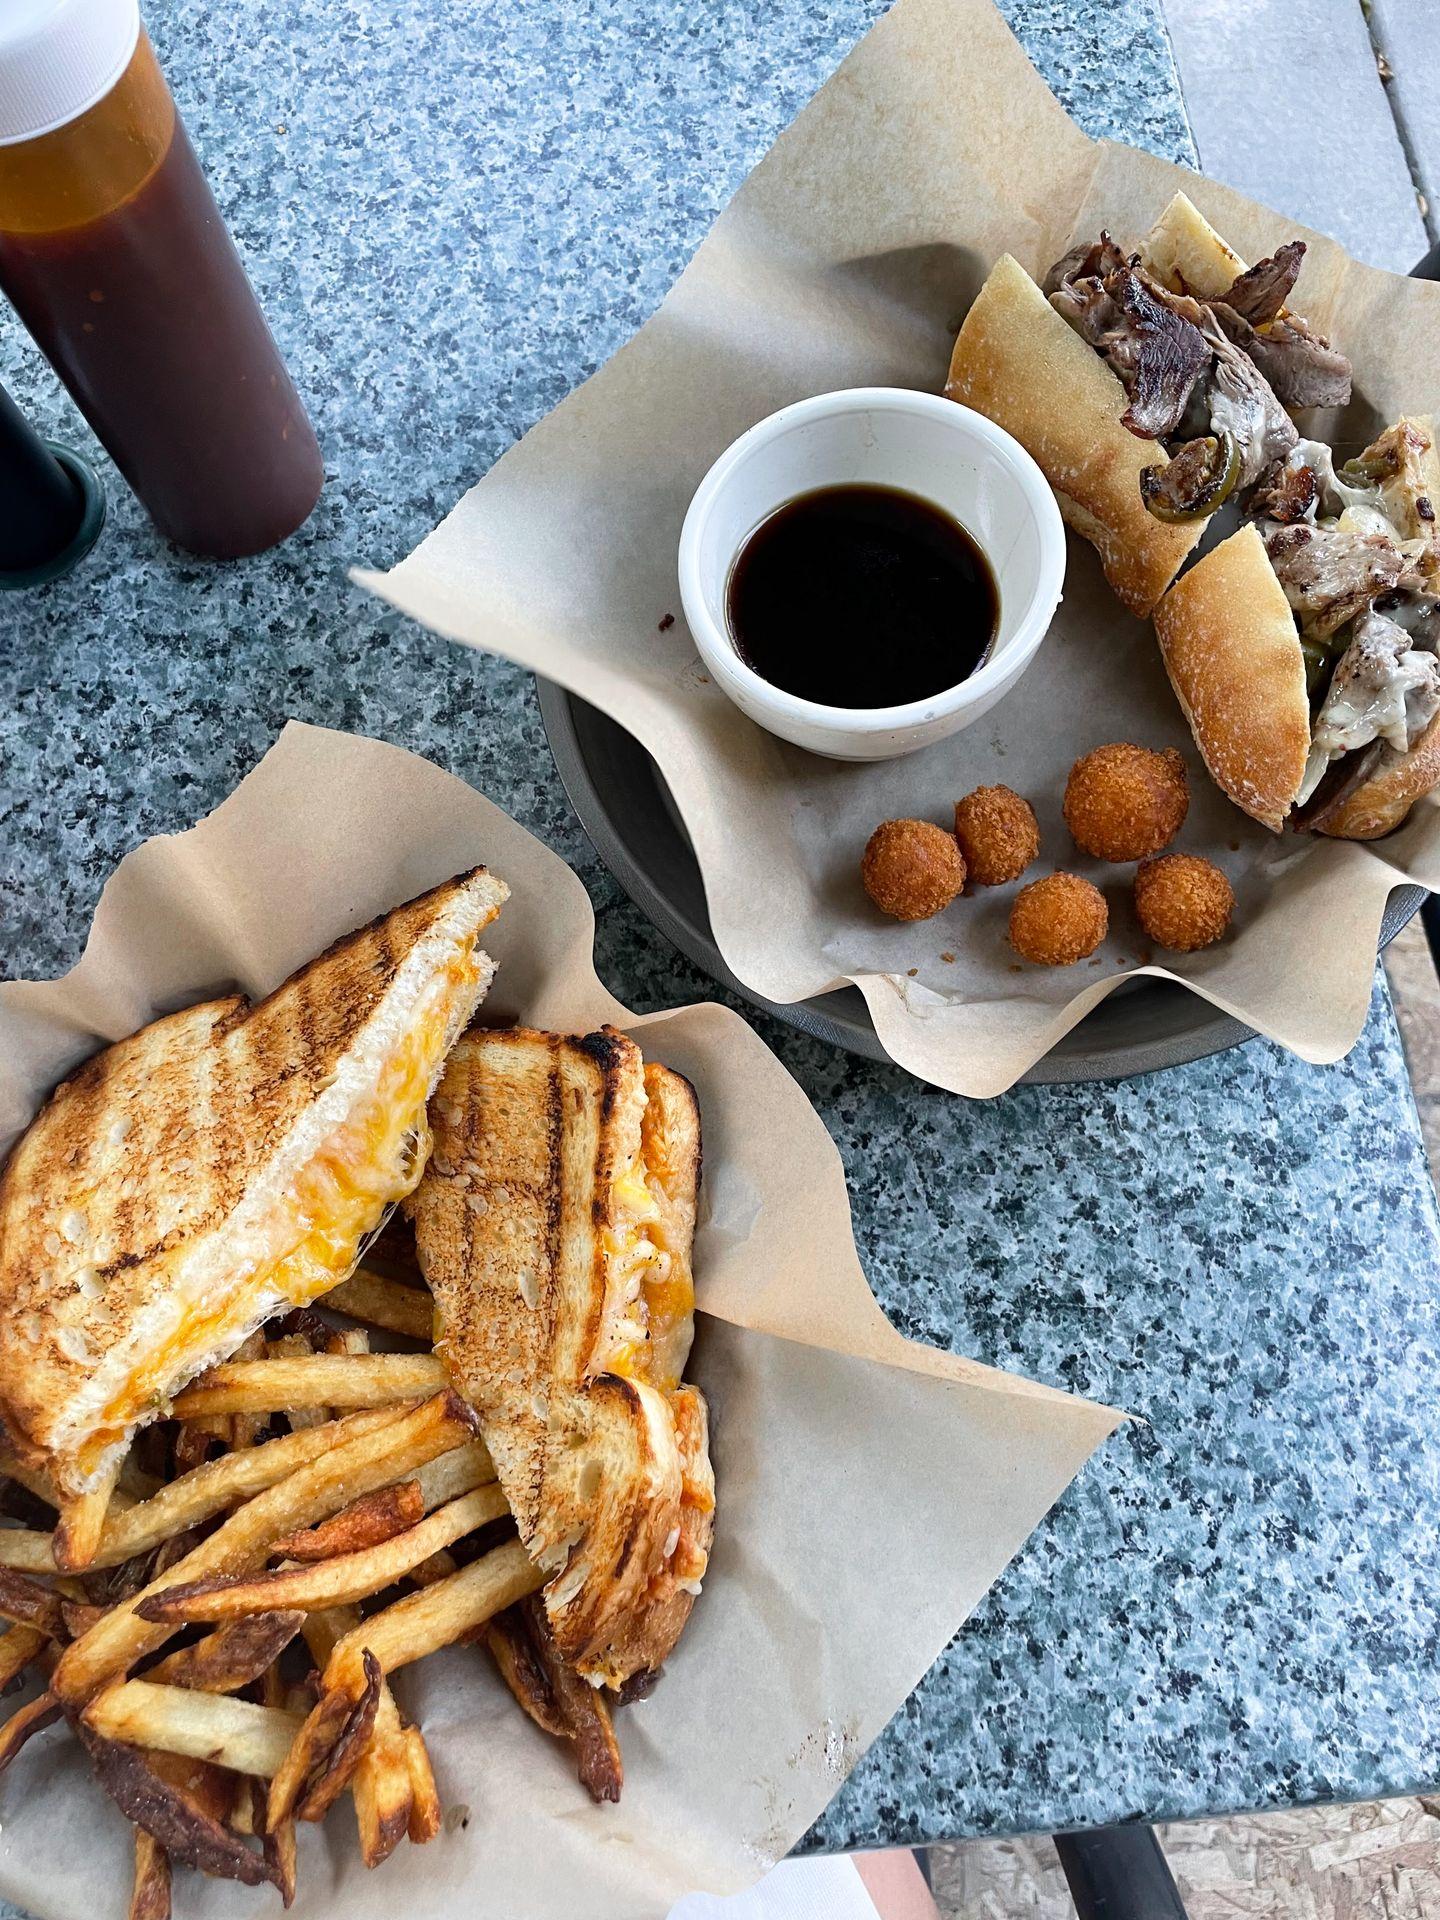 Grilled cheese, fries, a sandwich and croquettes from Bar Gernika in the Basque Block.